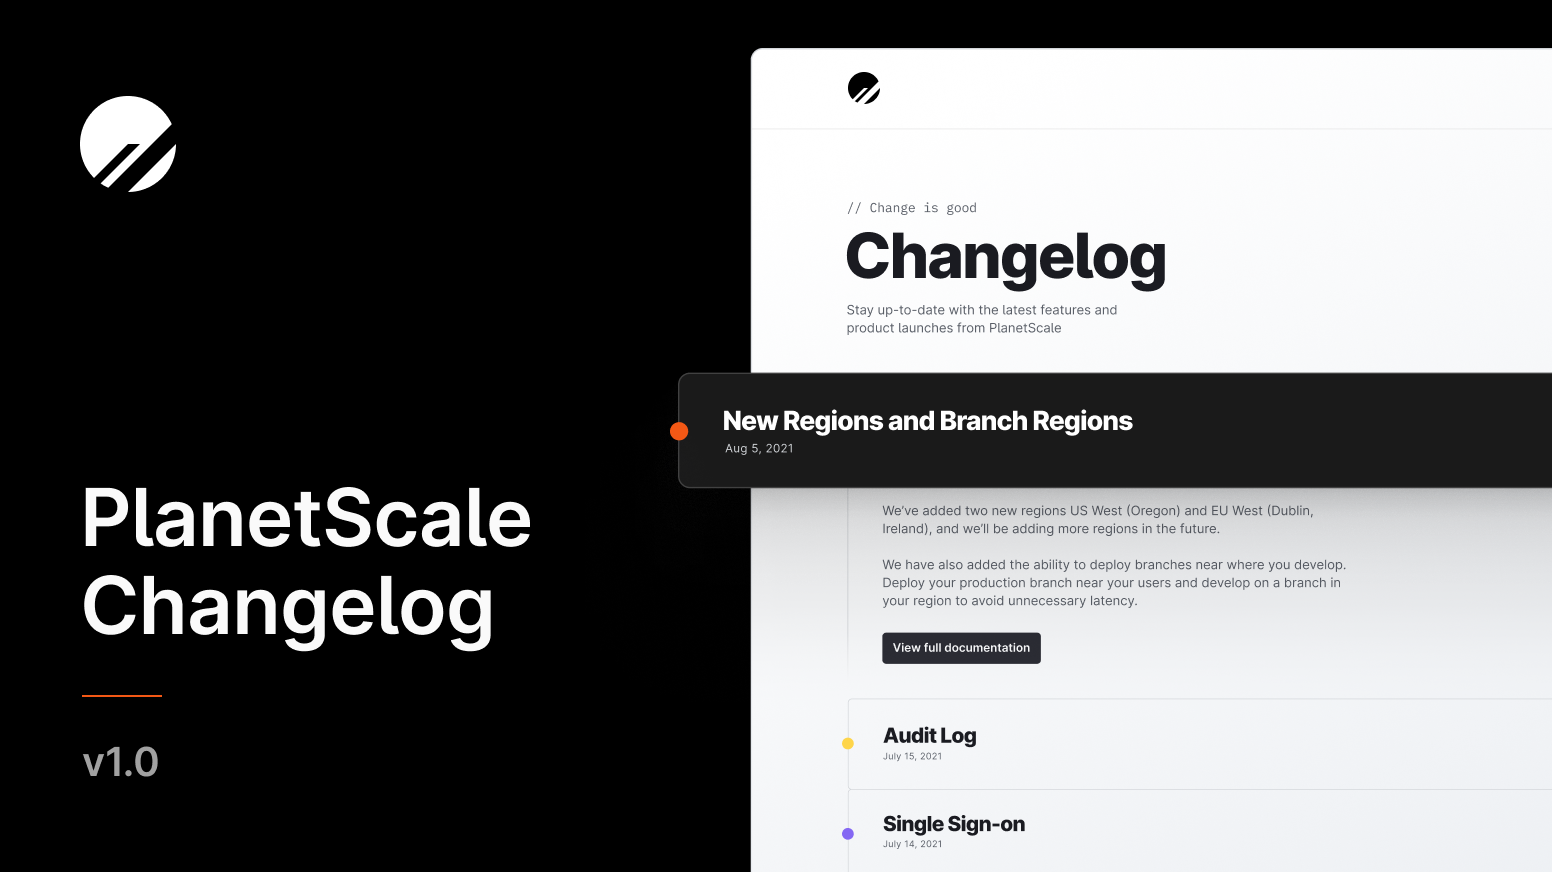 Stay up to date with the PlanetScale Changelog